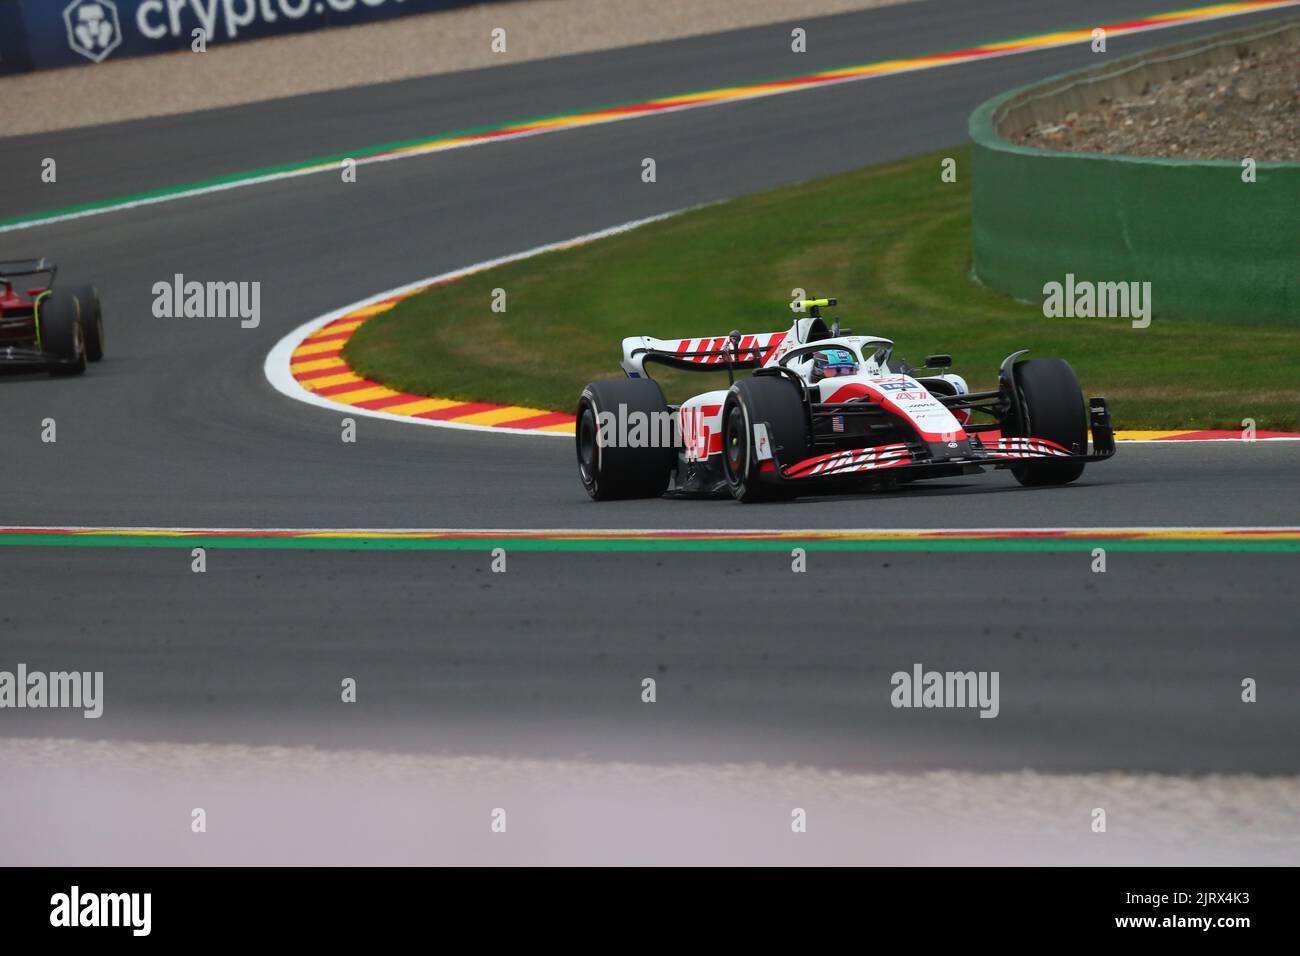 Stavelot Malmedy Spa, Belgium. 27th Jan, 2022. #47 Mick Schumacher, Haas F1 Team during the Belgian GP, 25-28 August 2022 at Spa-Francorchamps track, Formula 1 World championship 2022. Credit: Independent Photo Agency/Alamy Live News Stock Photo